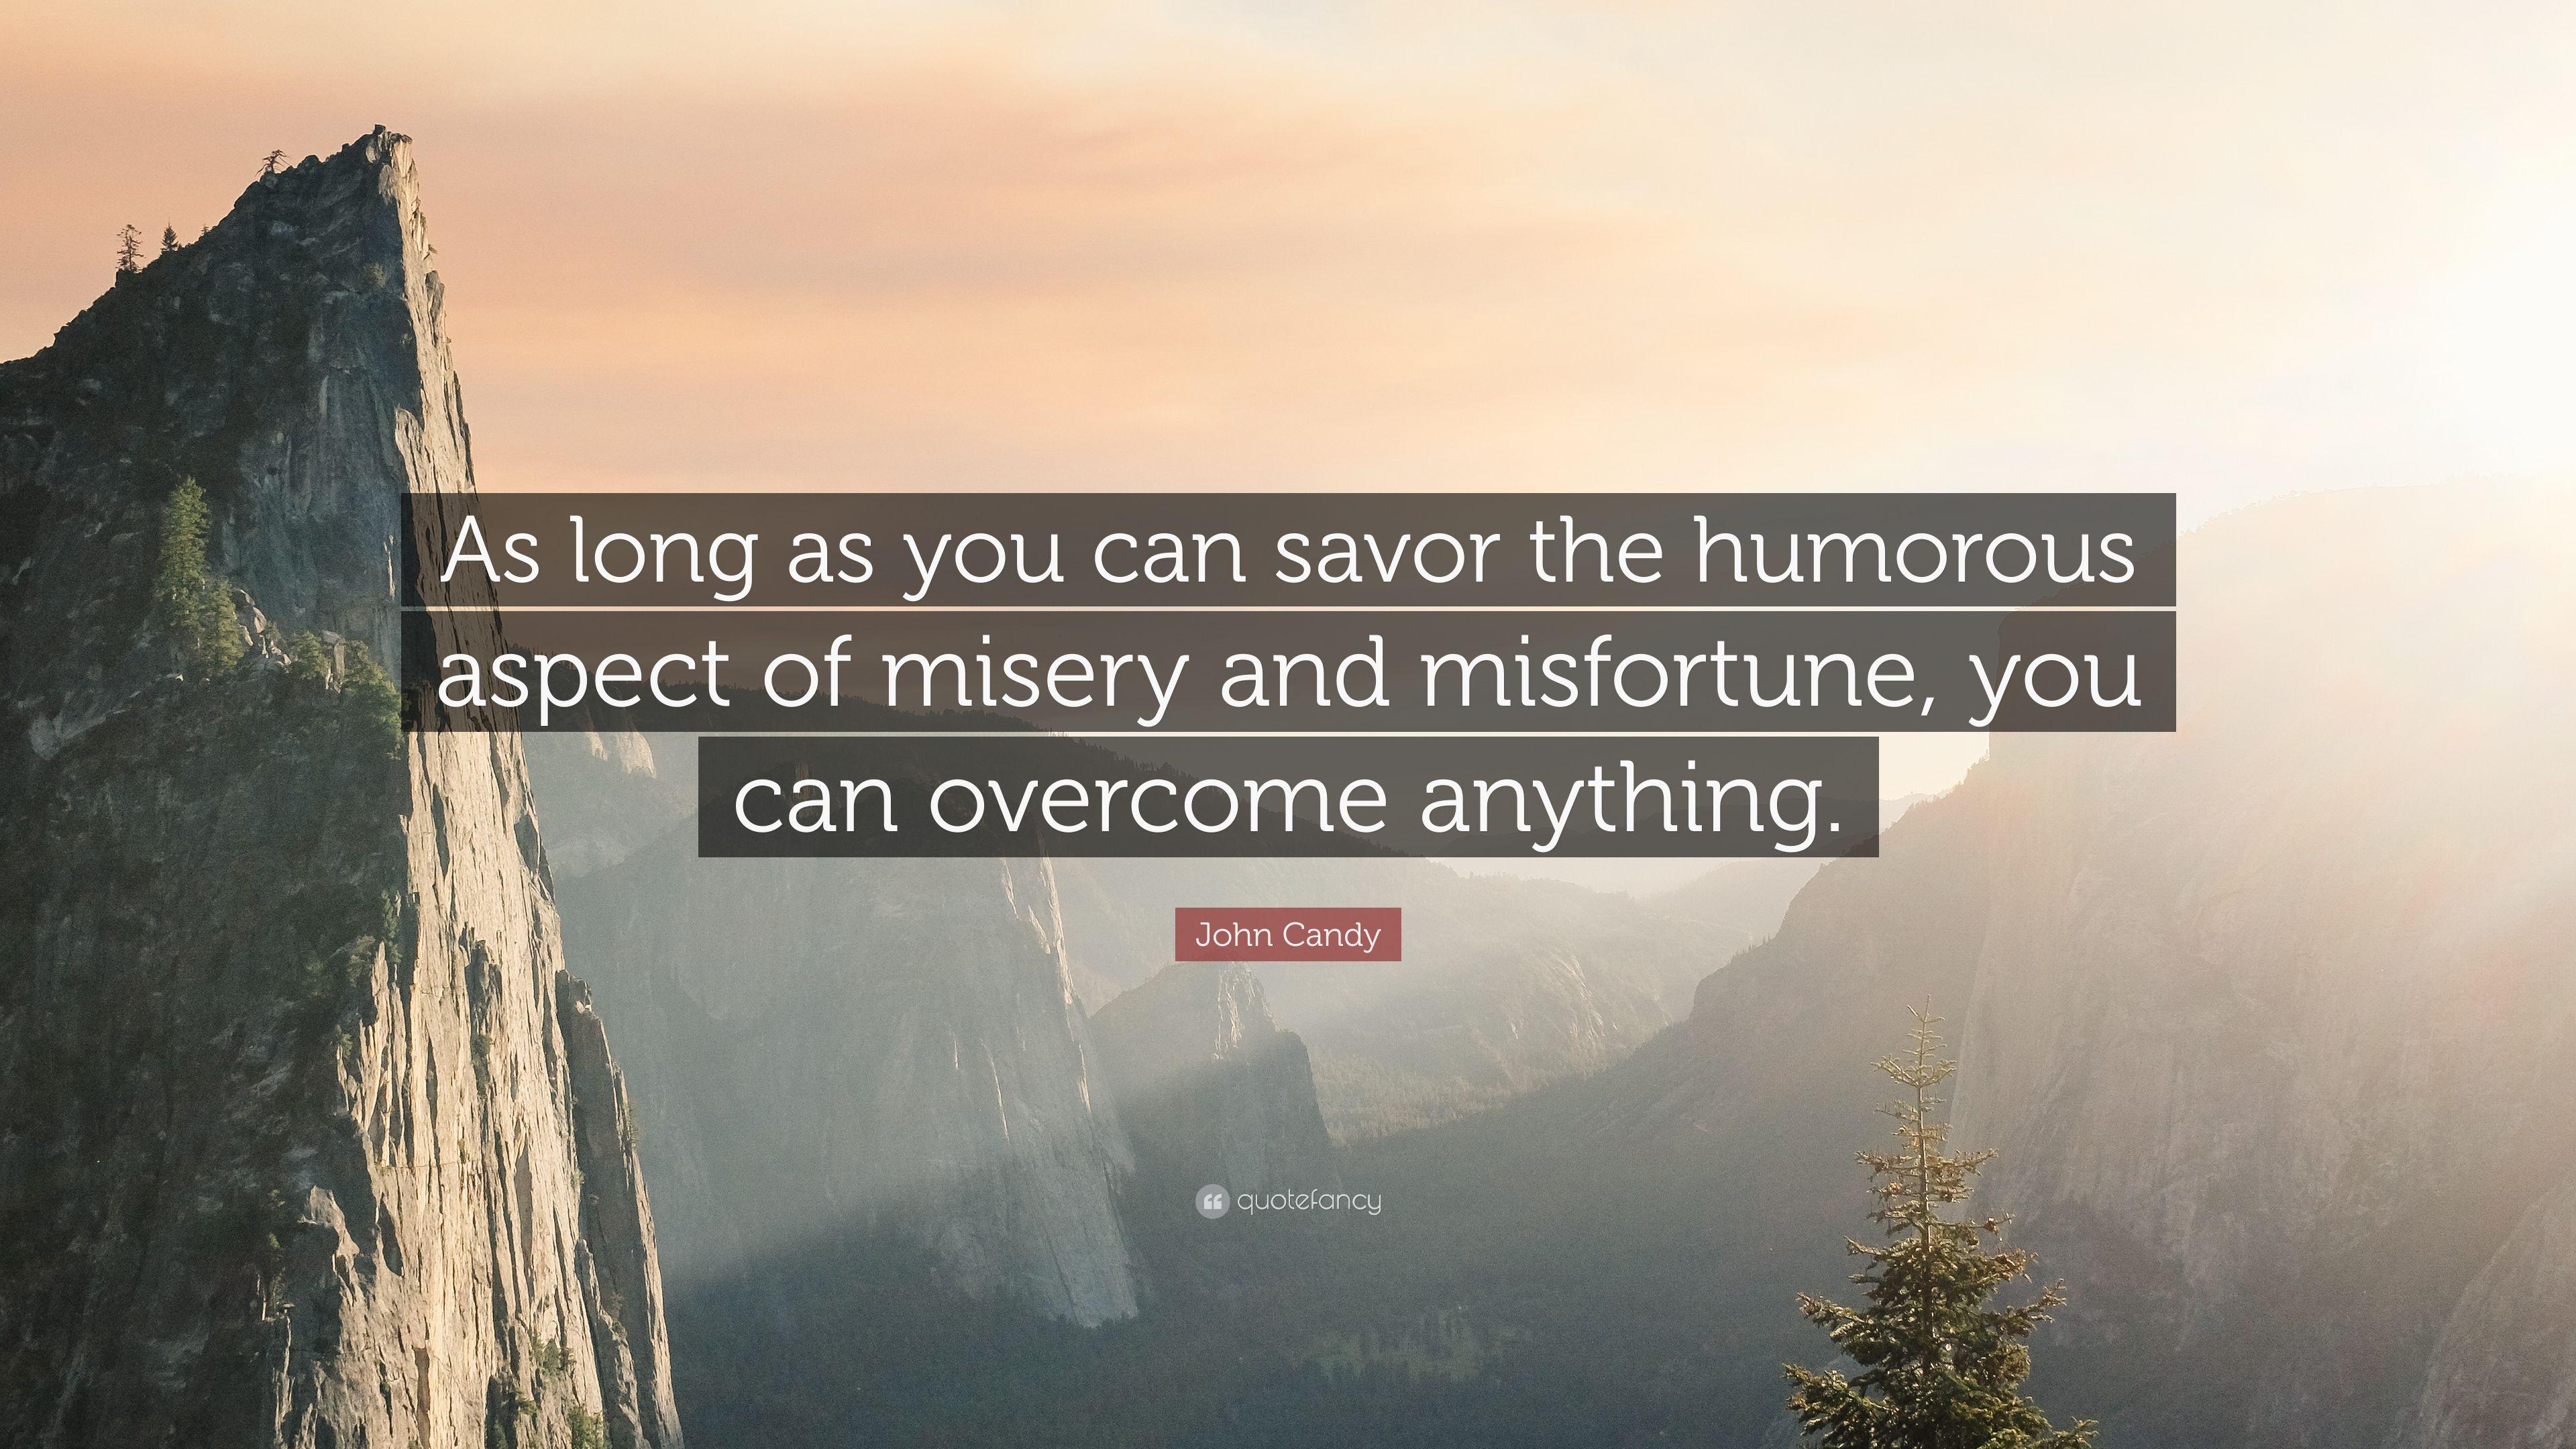 John Candy Quote: “As long as you can savor the humorous aspect